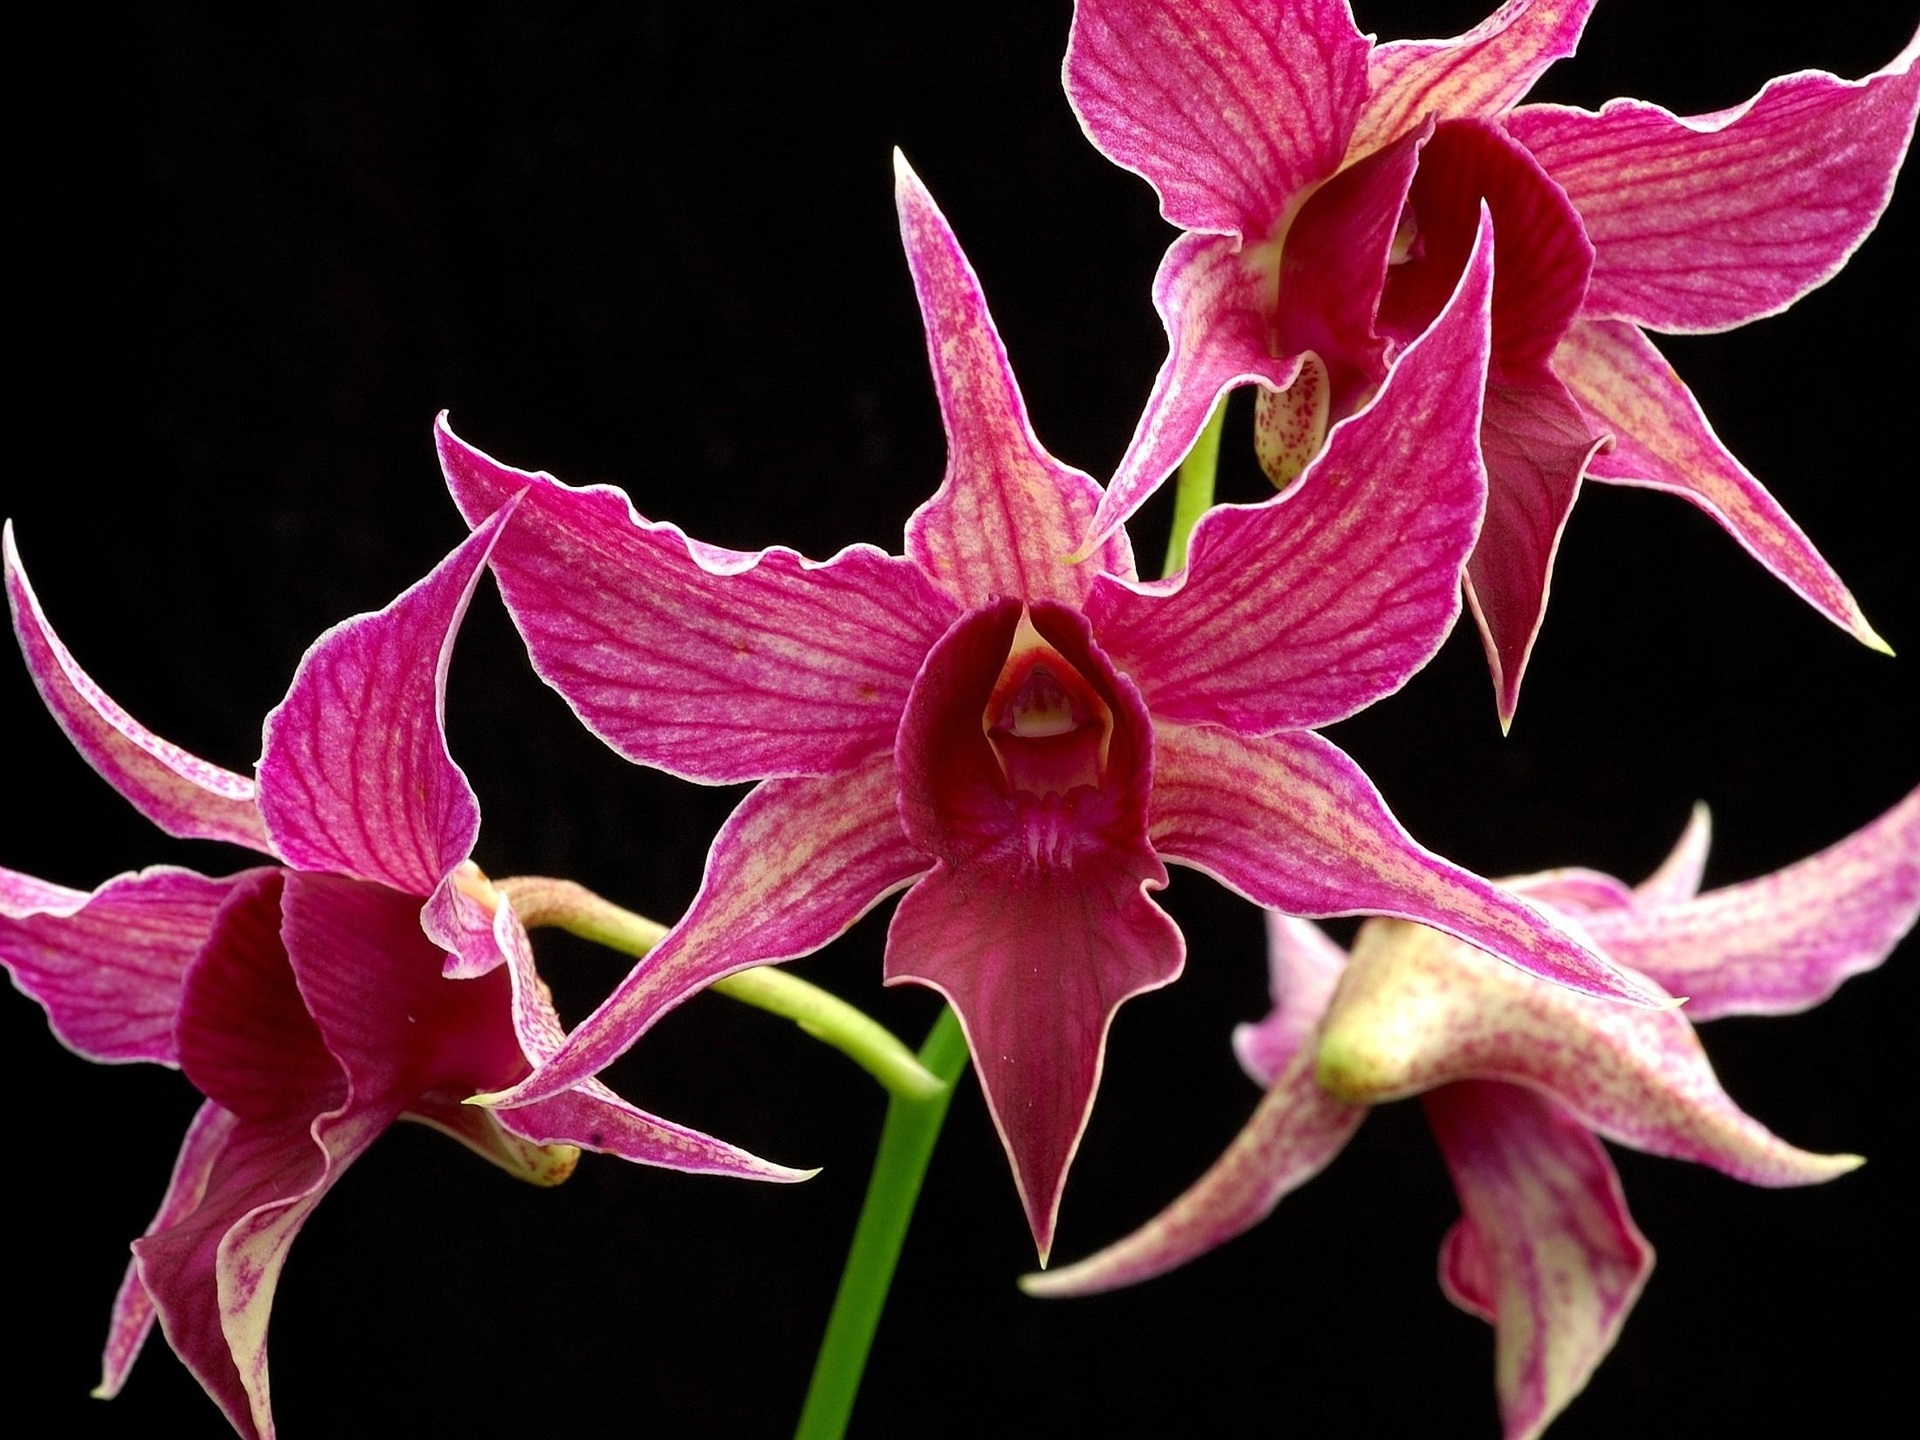 Wallpaper Pink Orchid Flowers Close-up, Black Background - Star Orchid - HD Wallpaper 